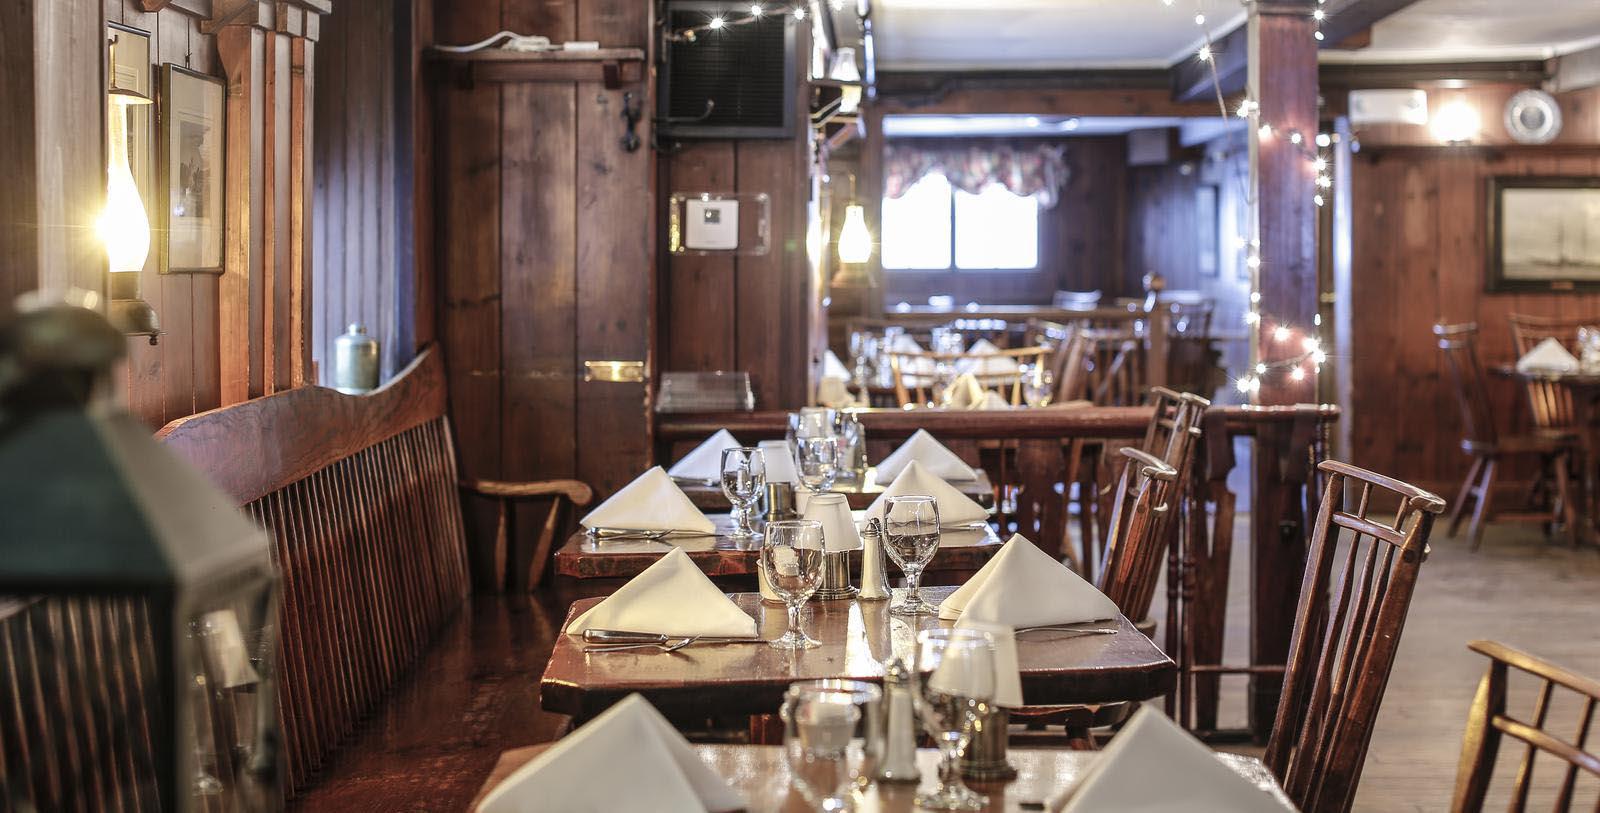 Taste authentic cuisine at the historic Taven at the Beekman Arms.